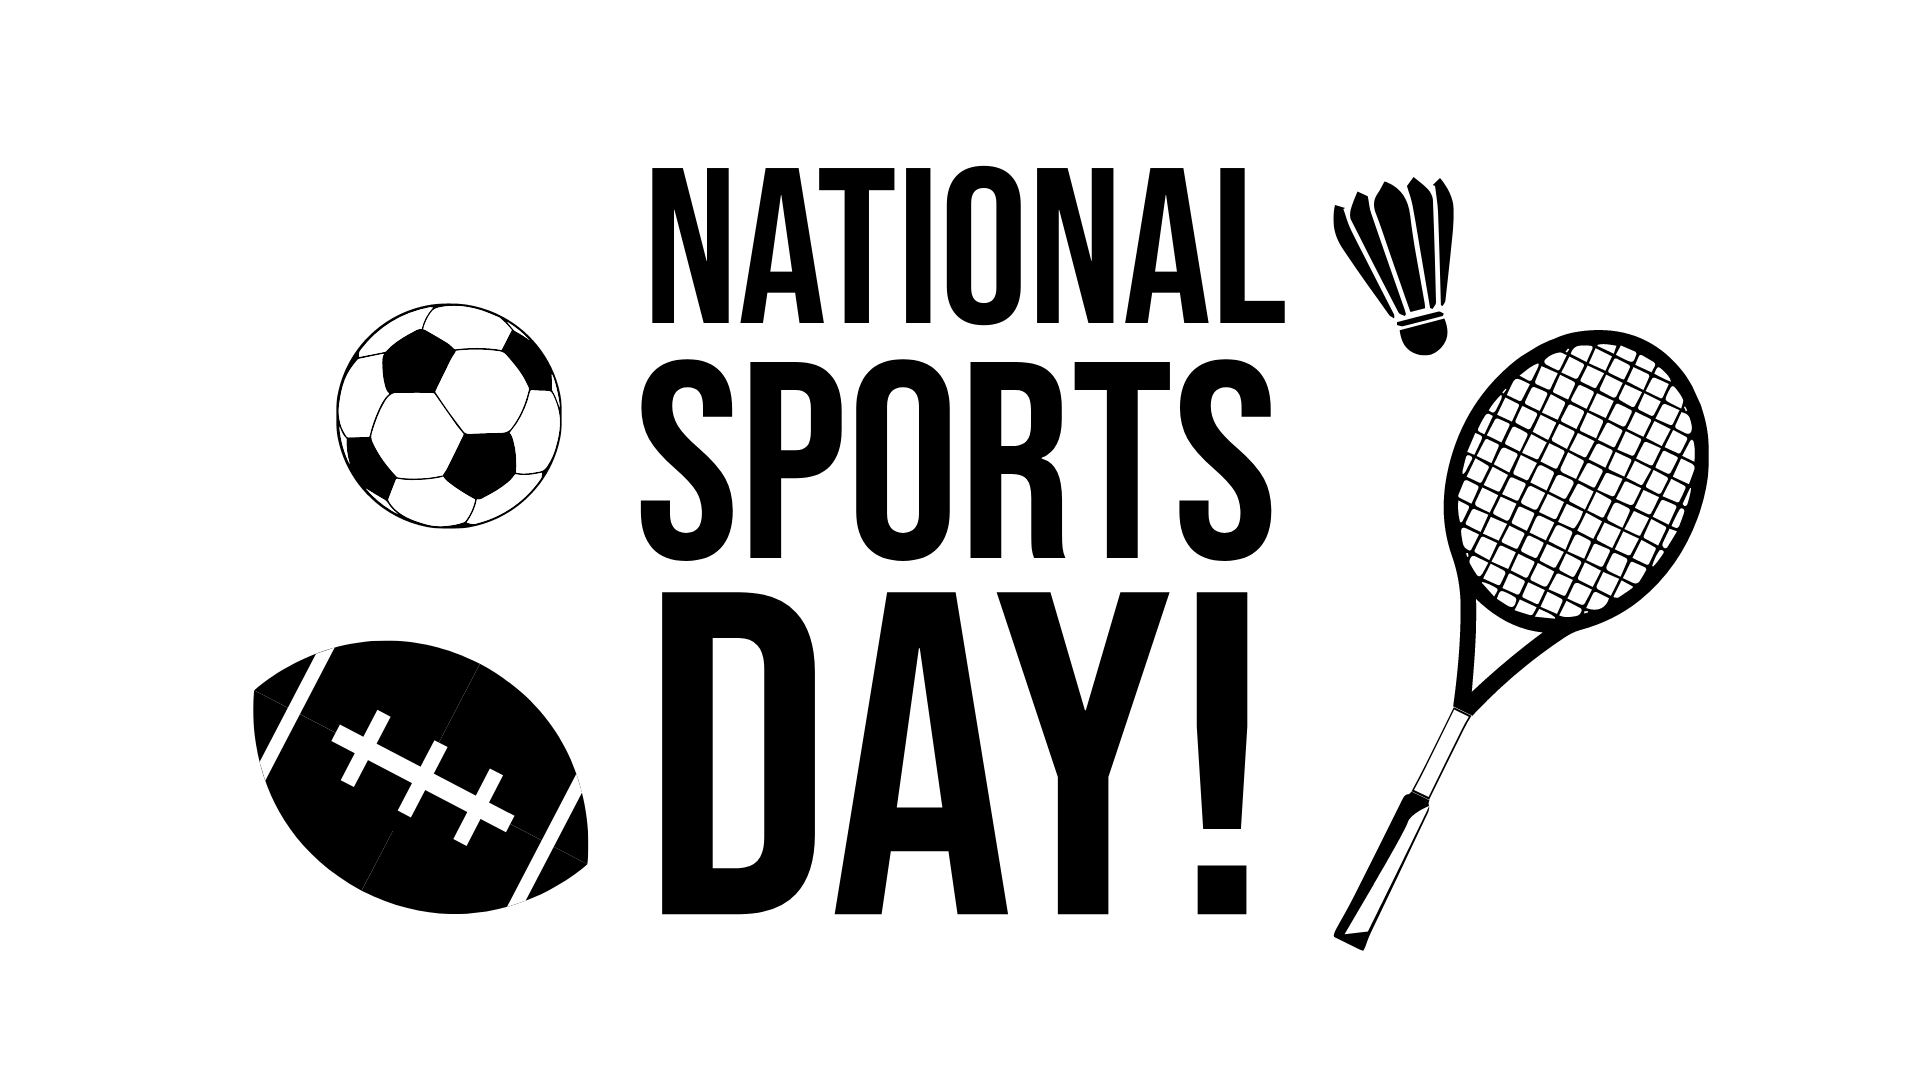 PM Narendra Modi greets sports enthusiasts on National Sports Day | Sports -Games